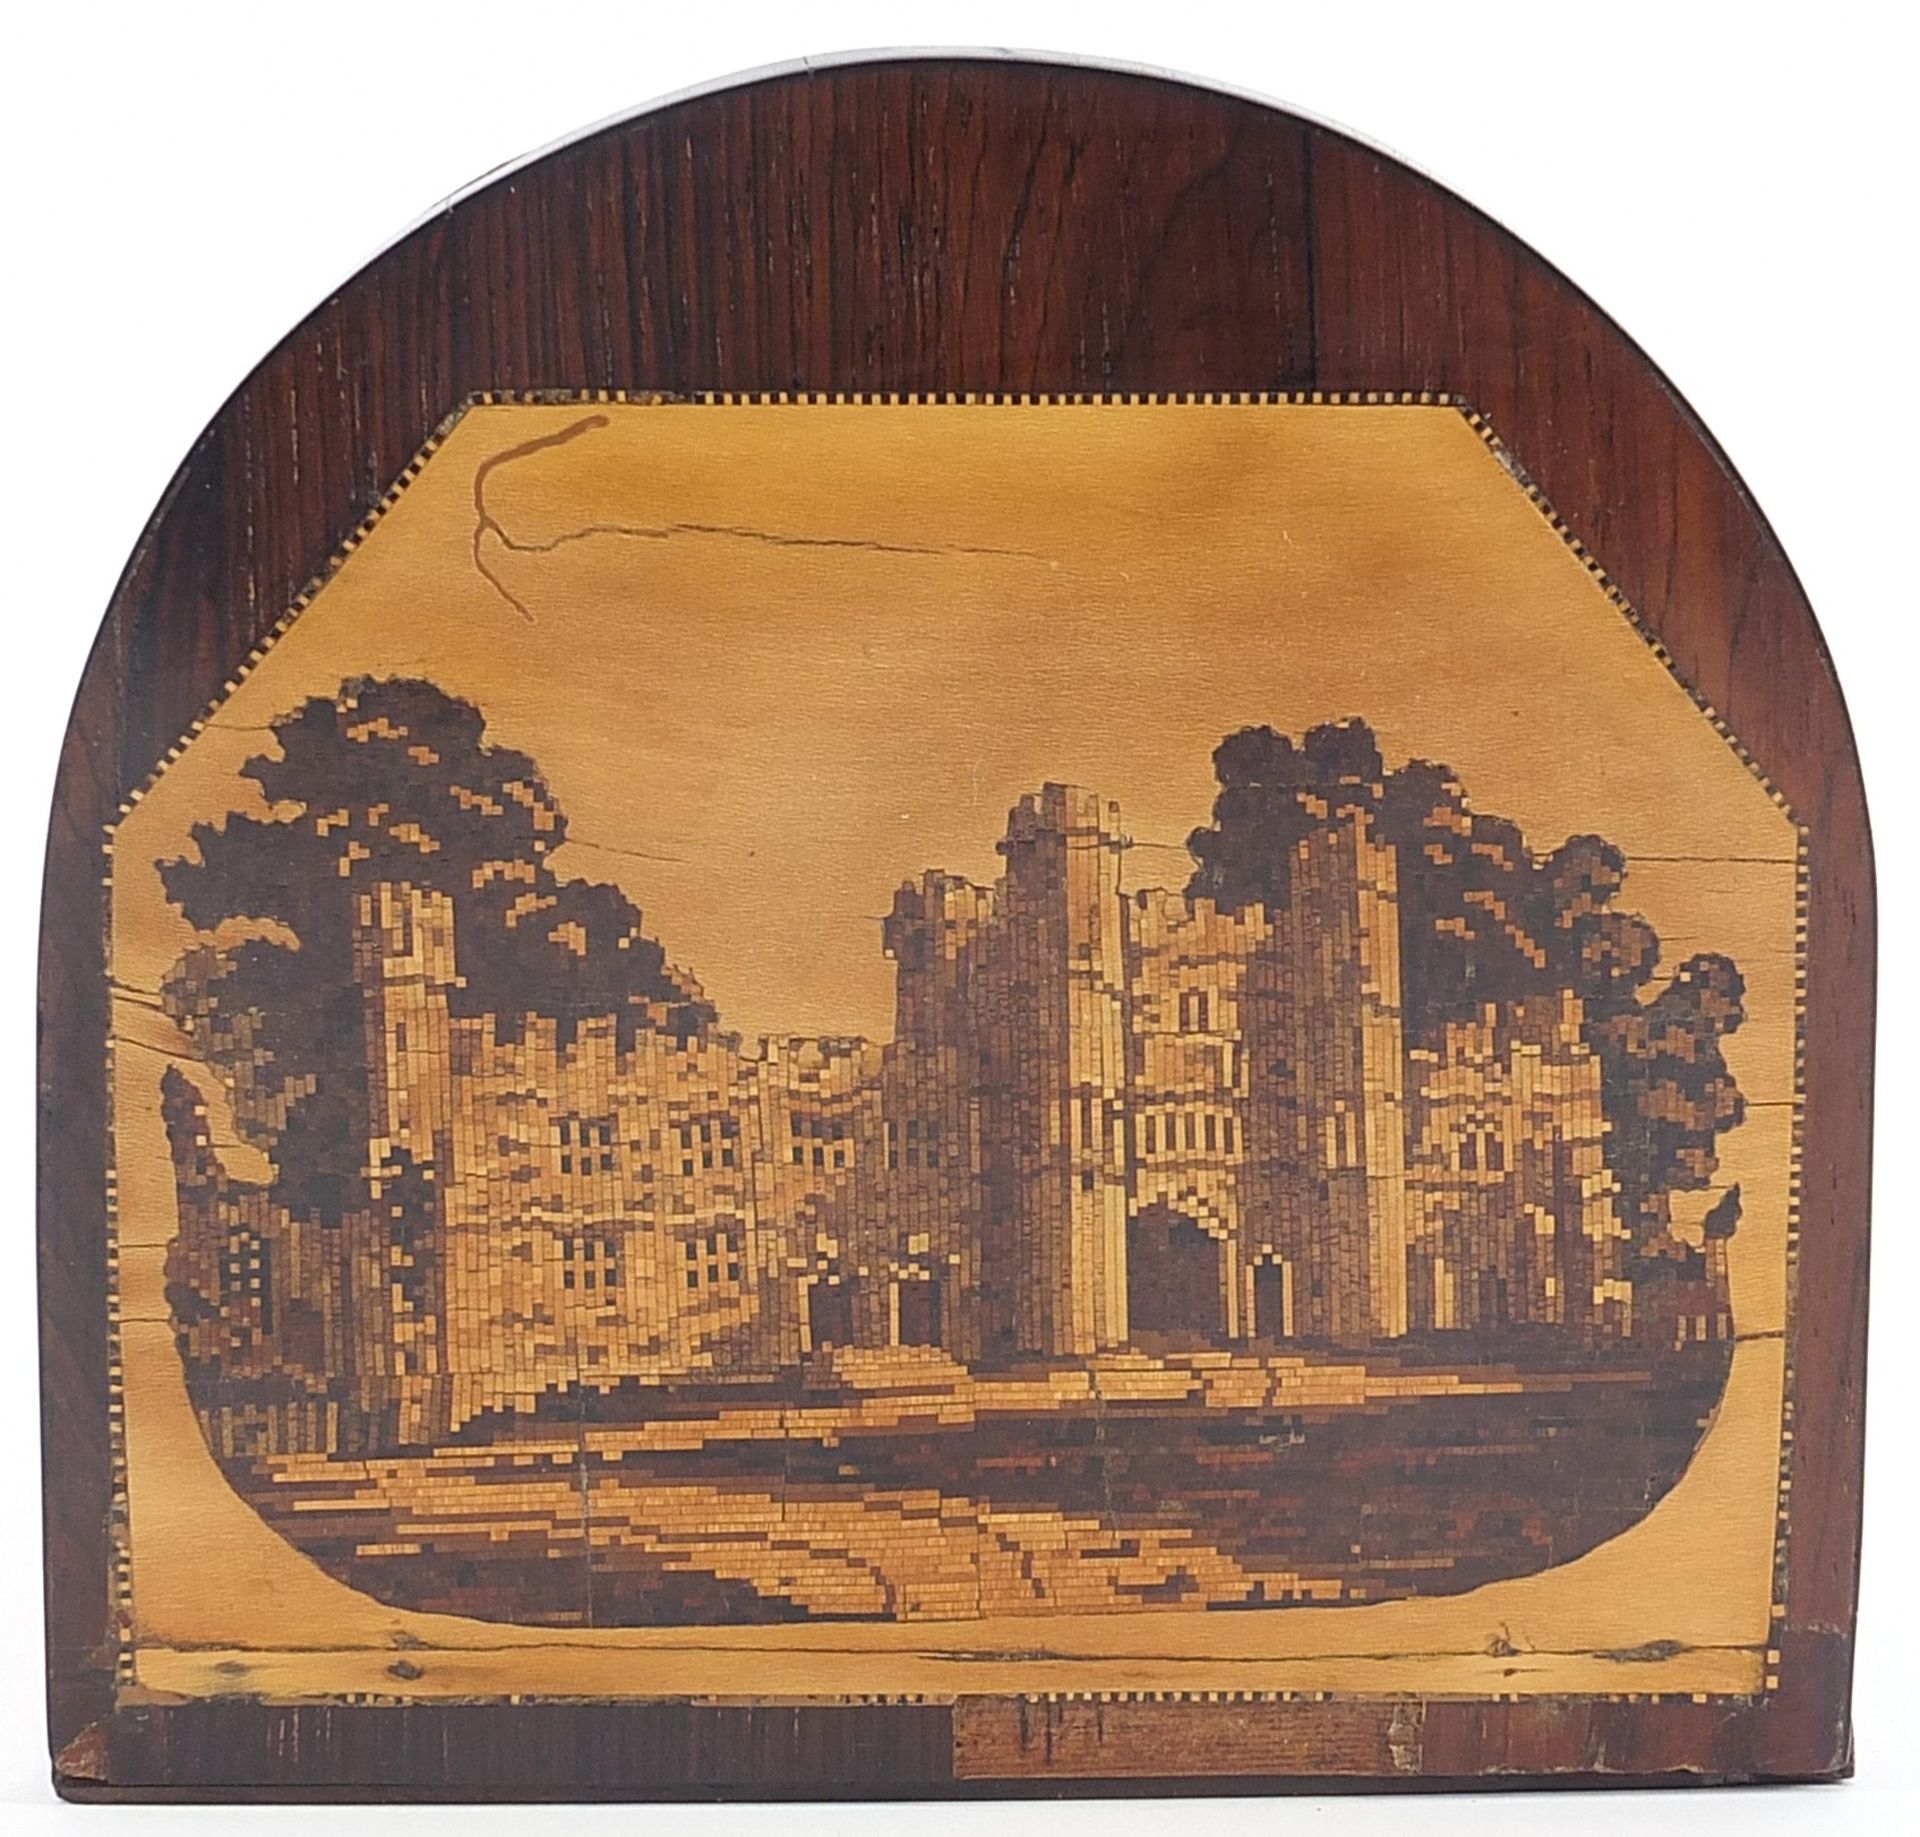 Victorian rosewood Tunbridge Ware extending book slide micro mosaic inlaid with two castles - Image 2 of 6